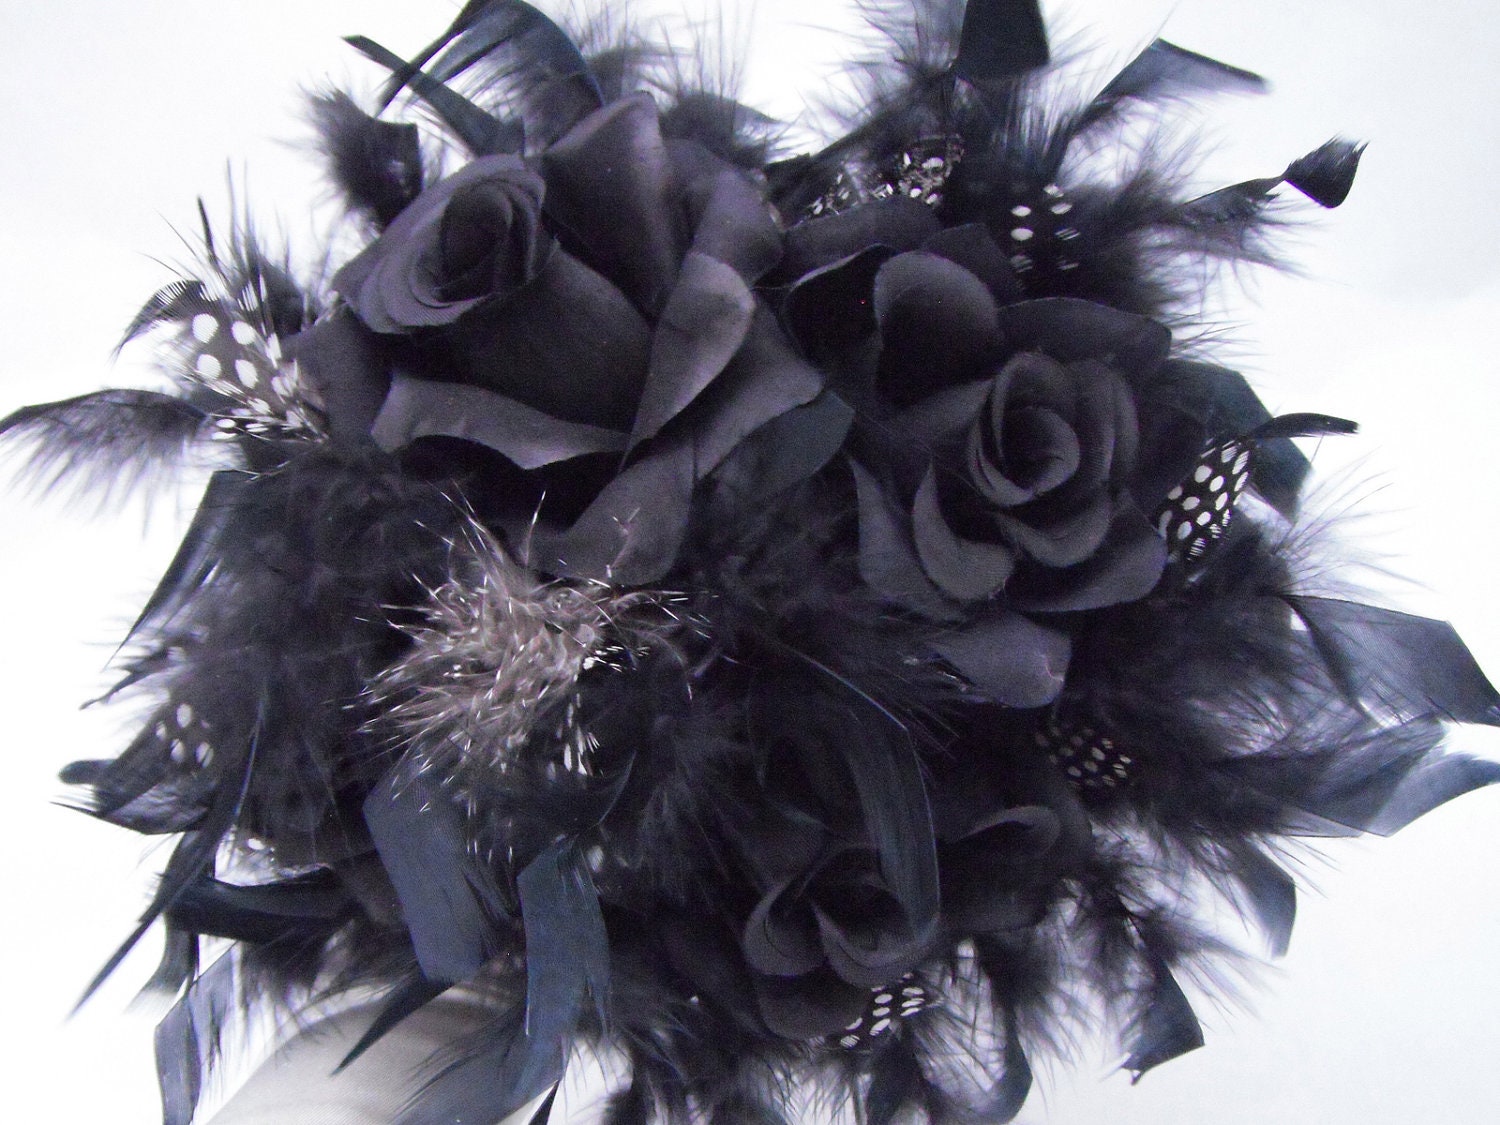 Bridal Wedding Bouquet Punk 4 Roses - Gothic Black Roses with Black and White Polka Dot and Black Chandelle Feathers - DarkRoseTreasures